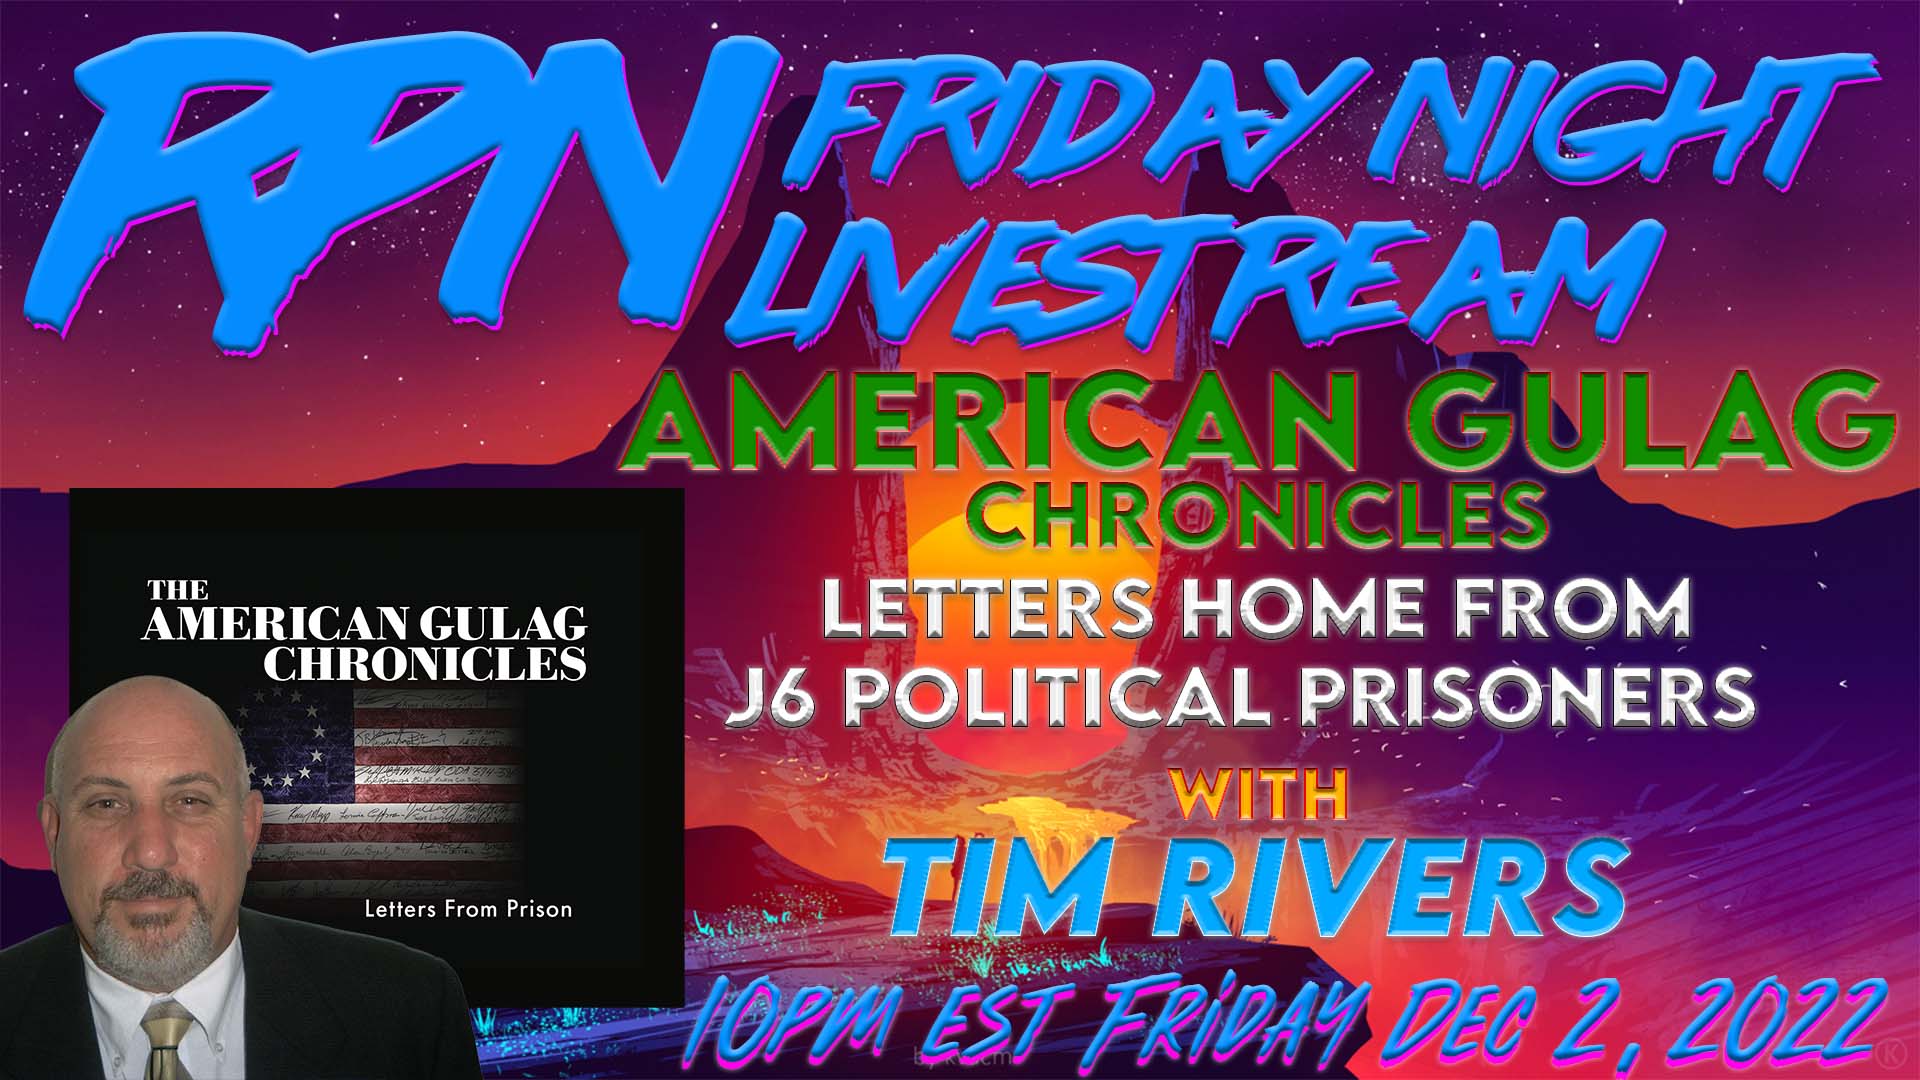 The American Gulag Chronicles - Stories From the Inside with Tim Rivers on Fri. Night Livestream